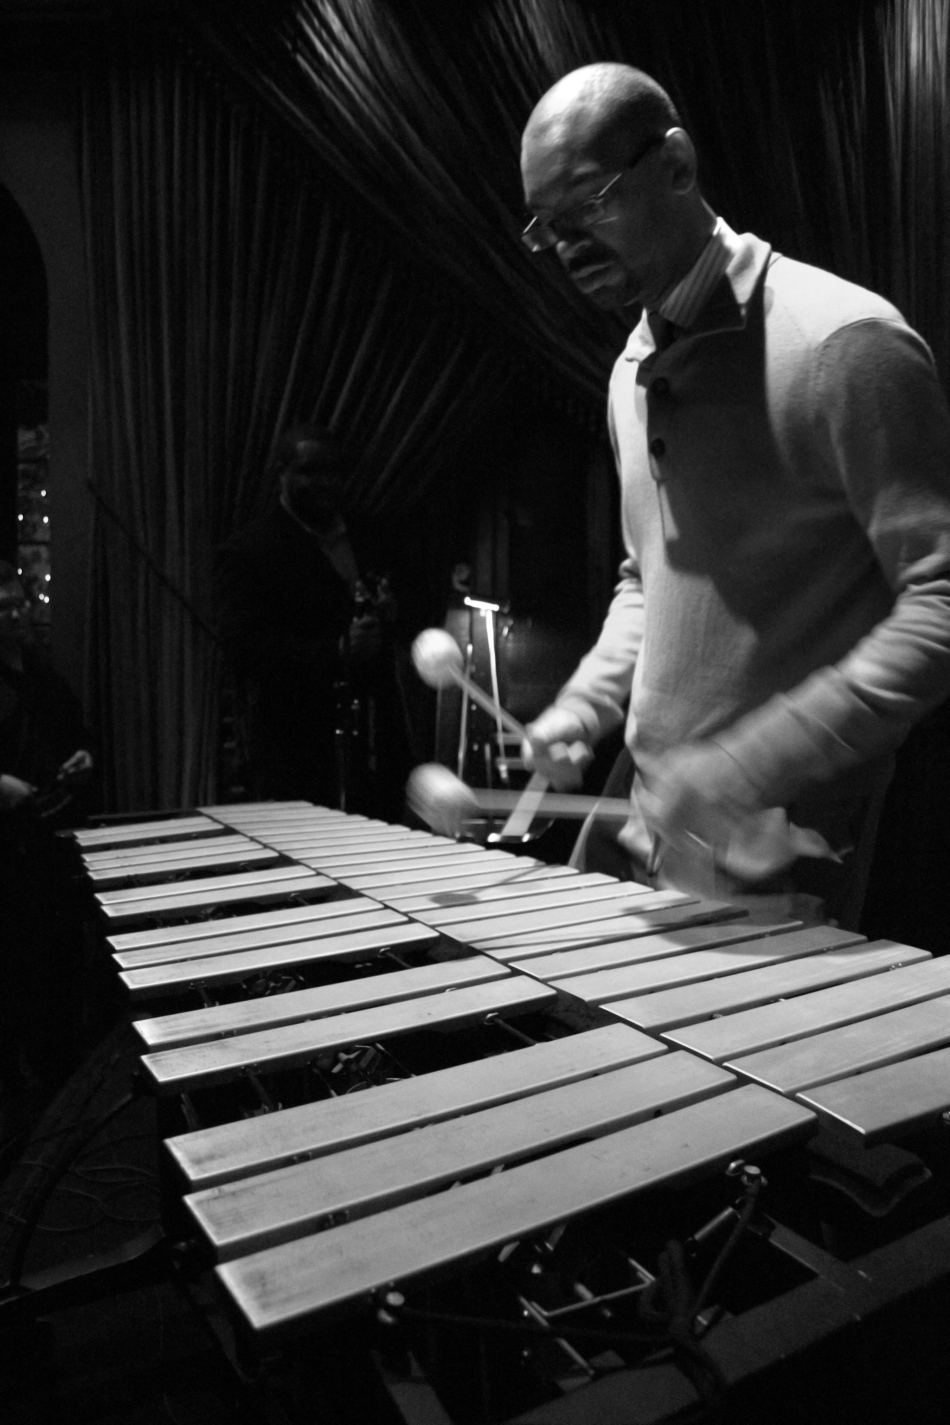 Jazz Vibraphonist Jason Marsalis plays at Irvin mayfield's Jazz Playhouse on March 9, 2013 for the release of his new album In A World of Mallets